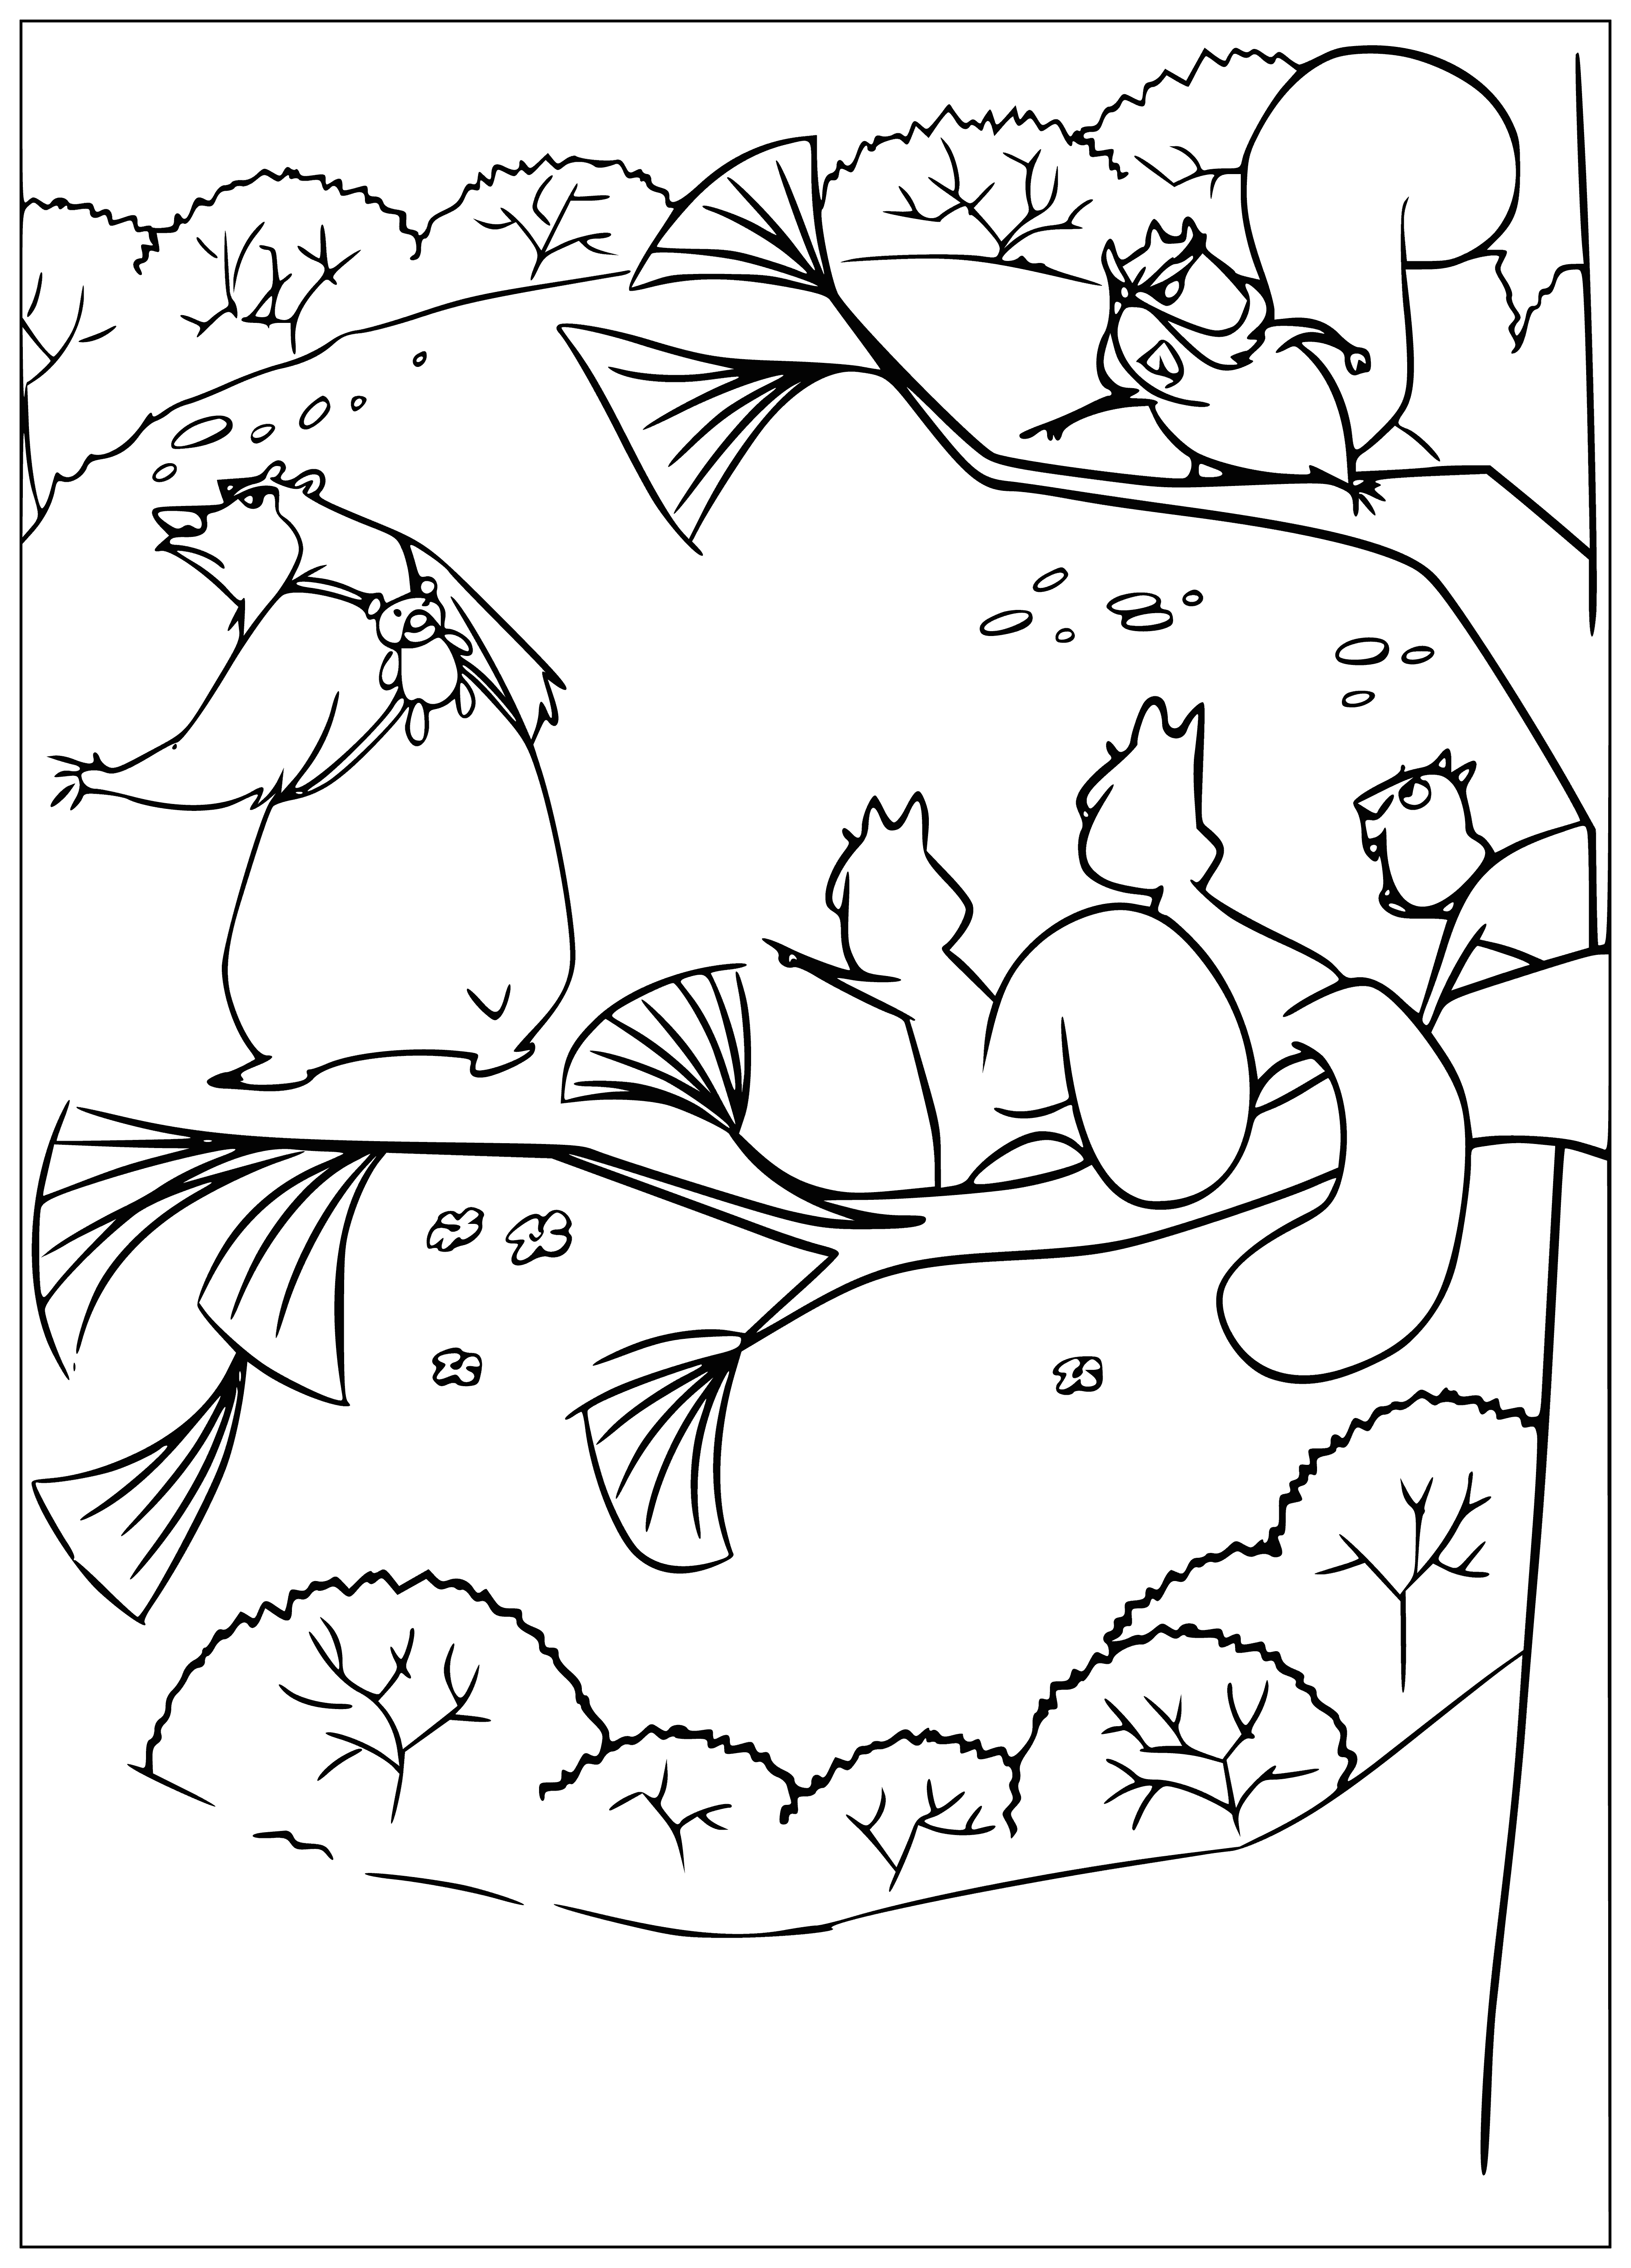 Squirrels and Bear coloring page